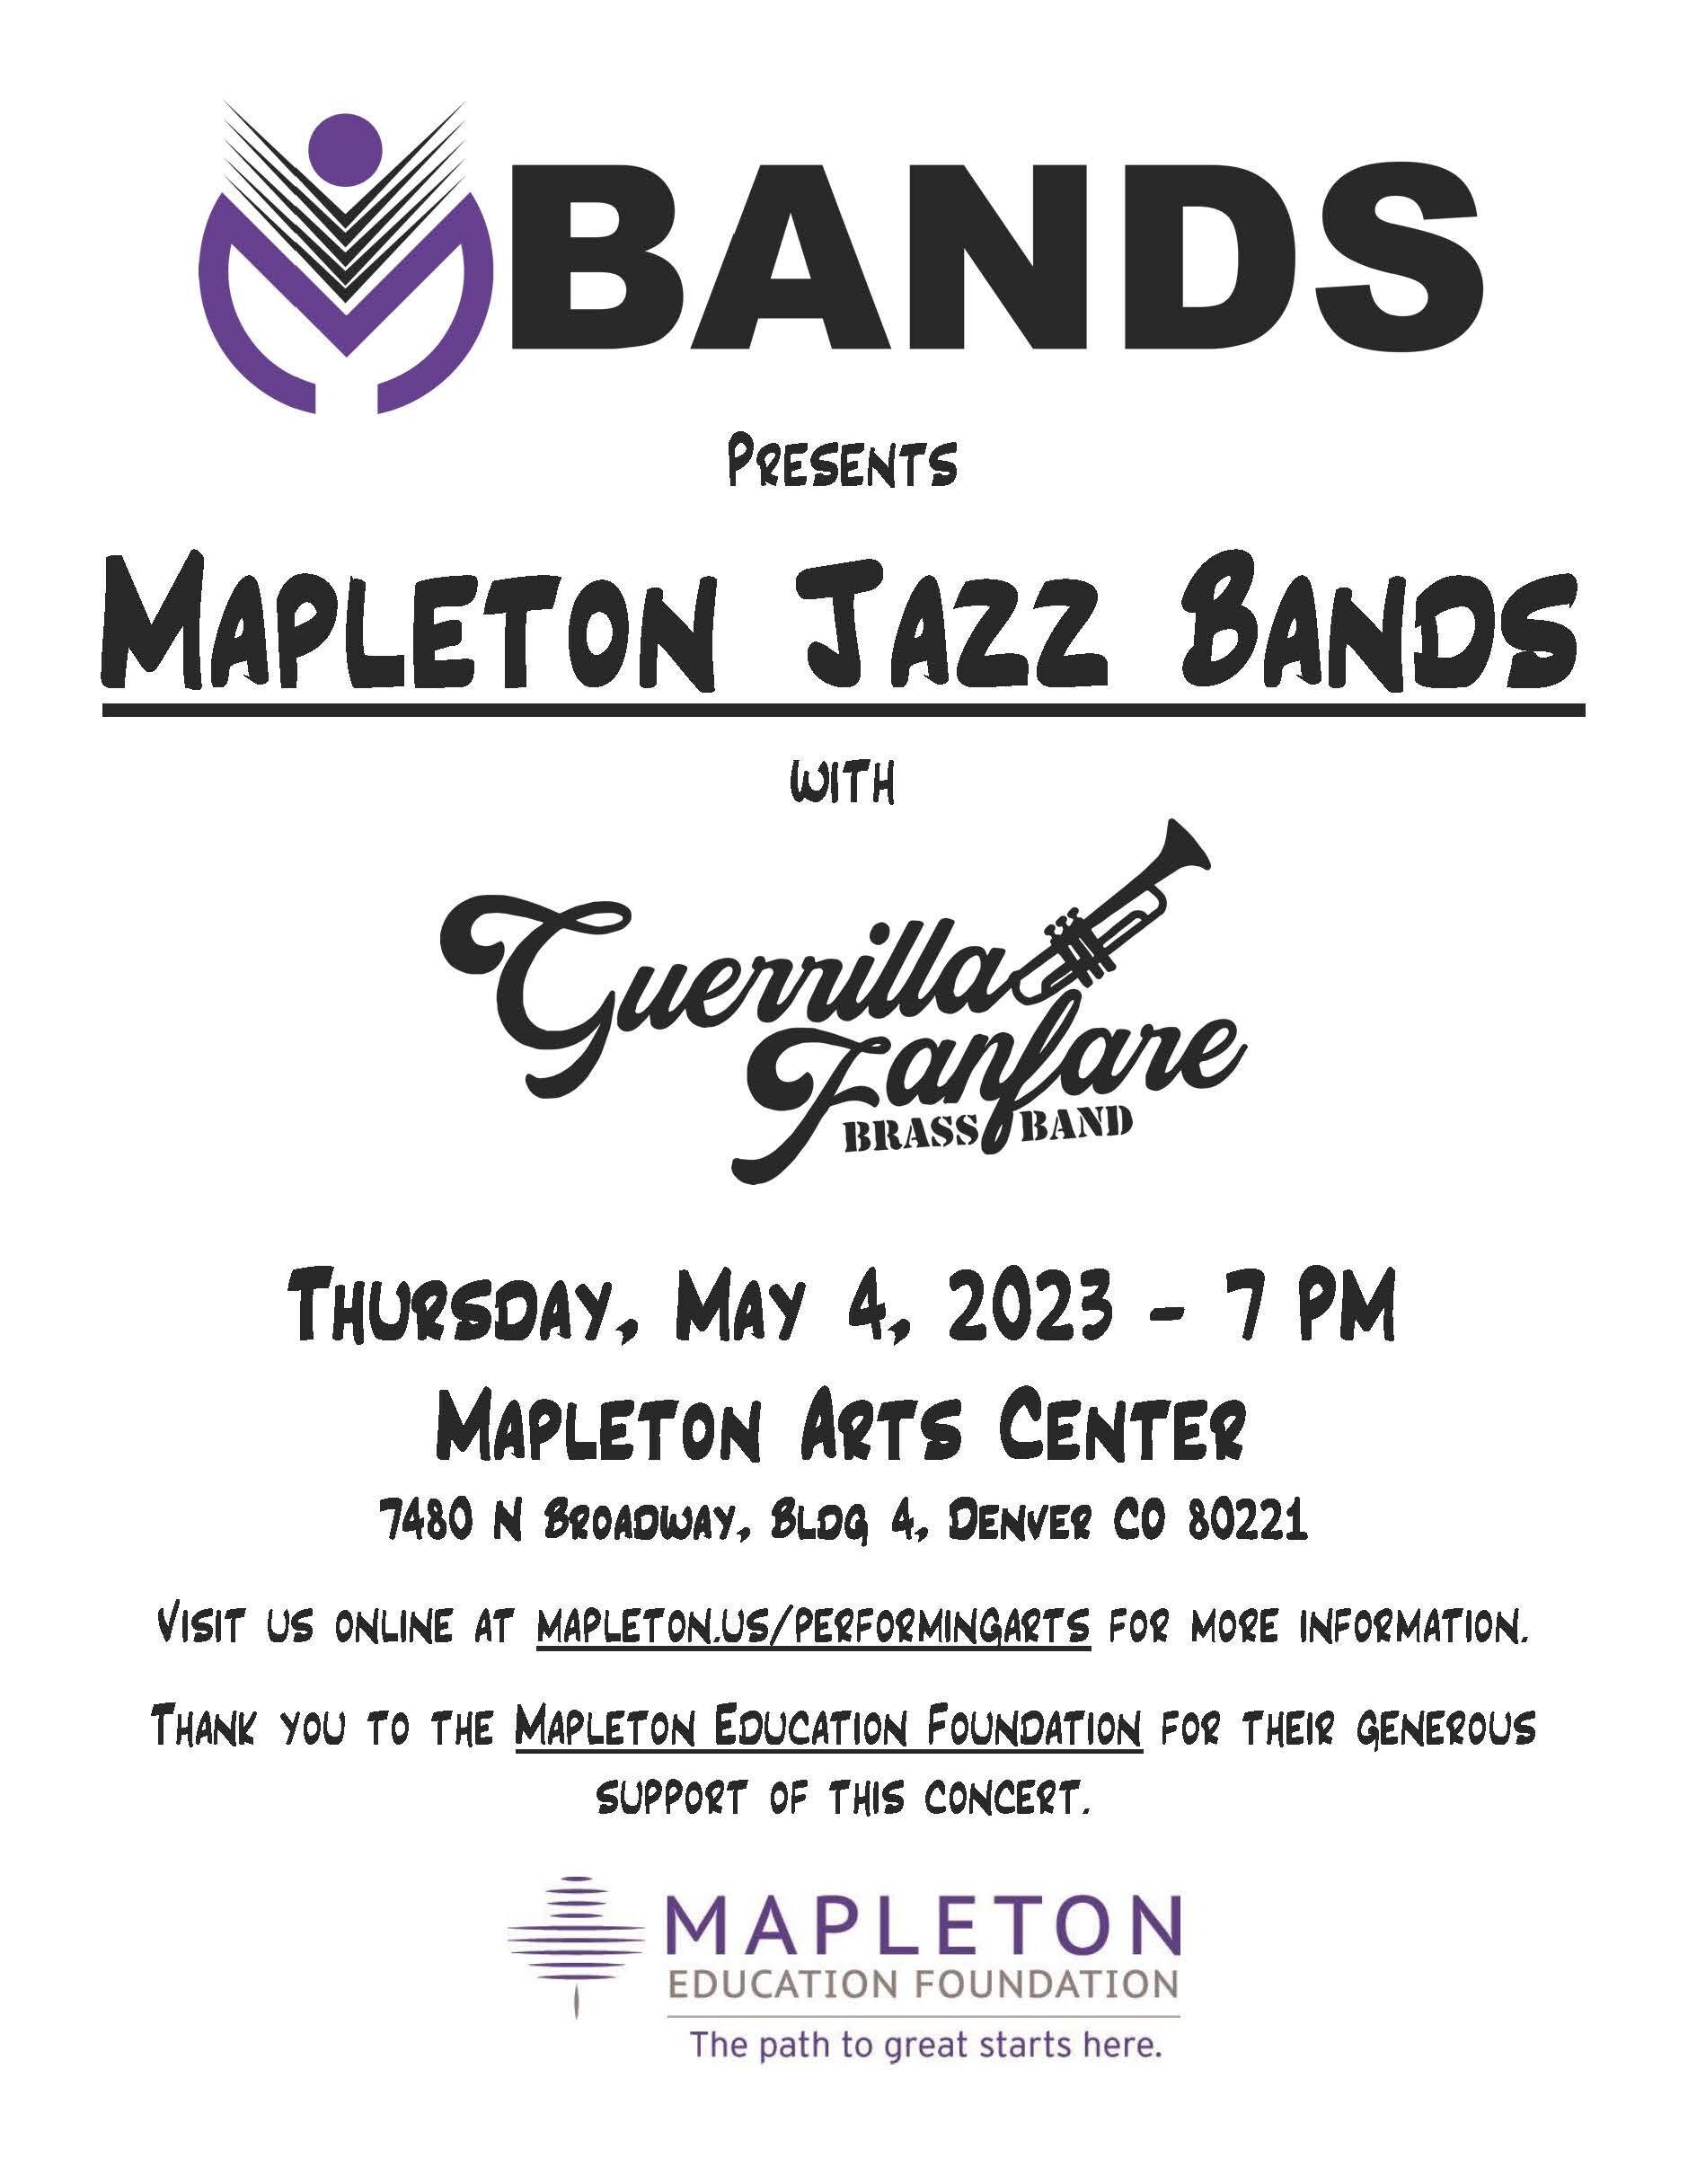 Mapleton Jazz Bands with Guerrilla Fanfare Brass Band